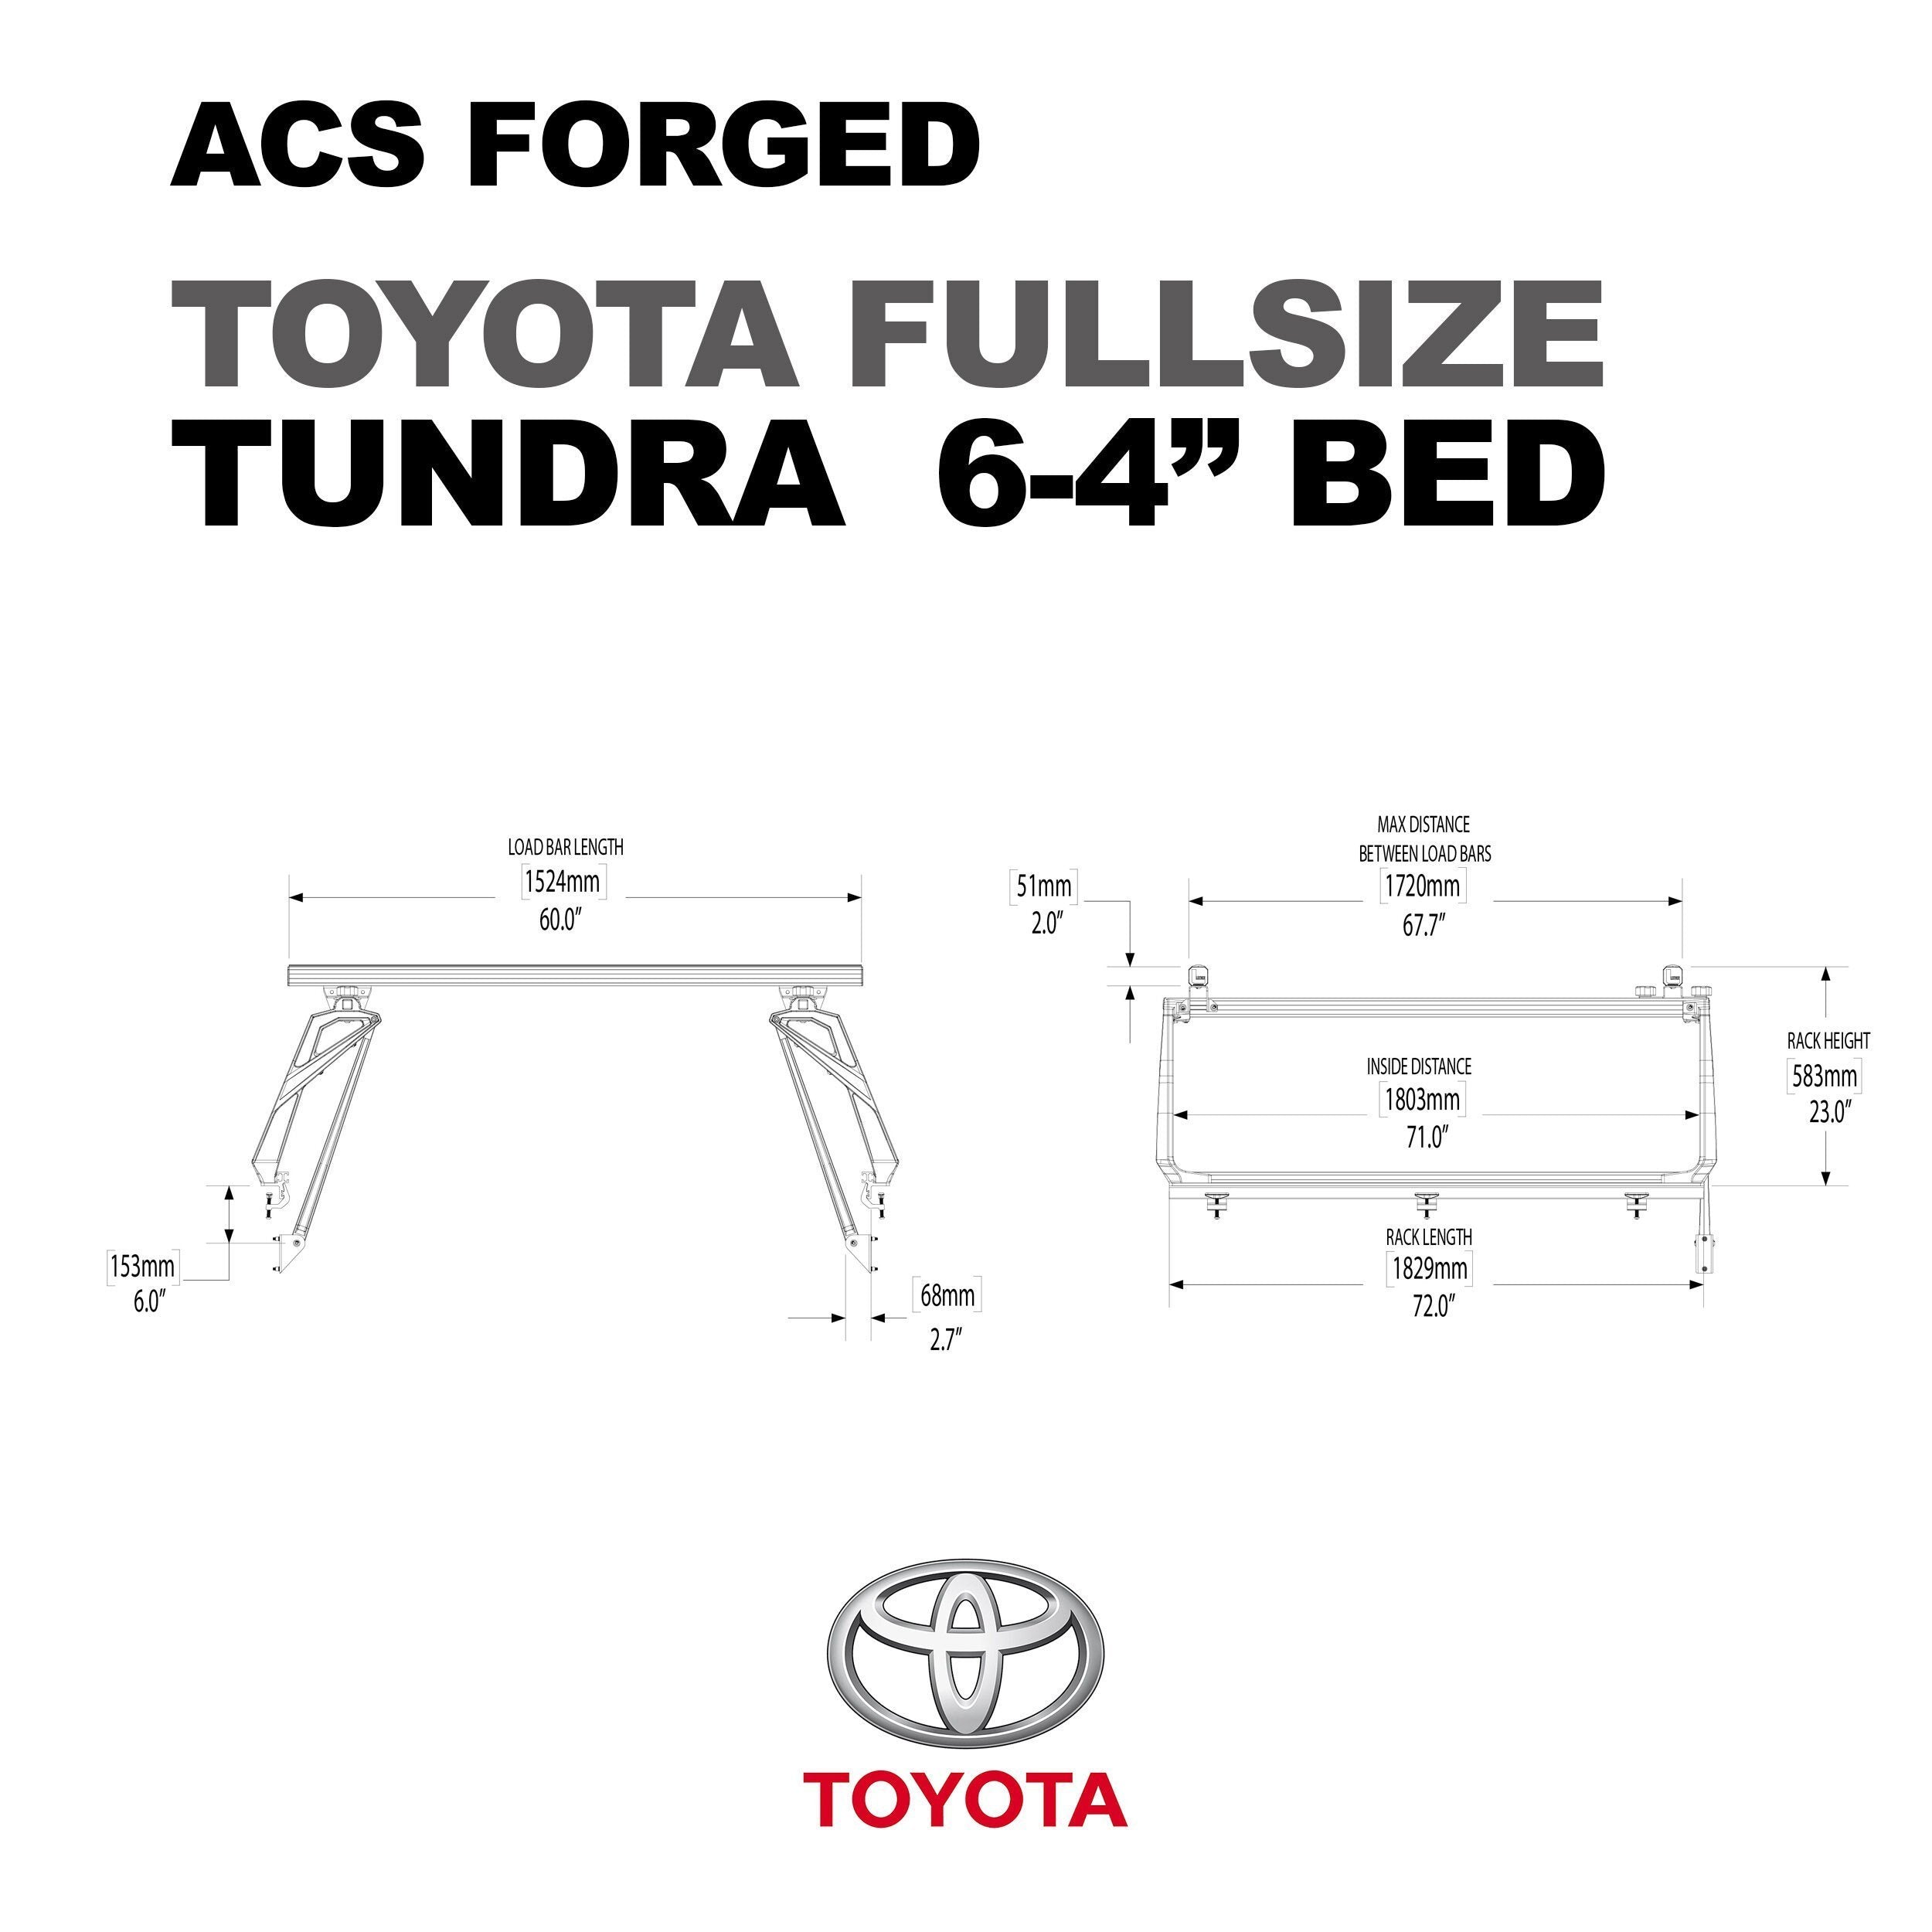 '07-21 Toyota Tundra-ACS Forged Bed Accessories Leitner Designs design